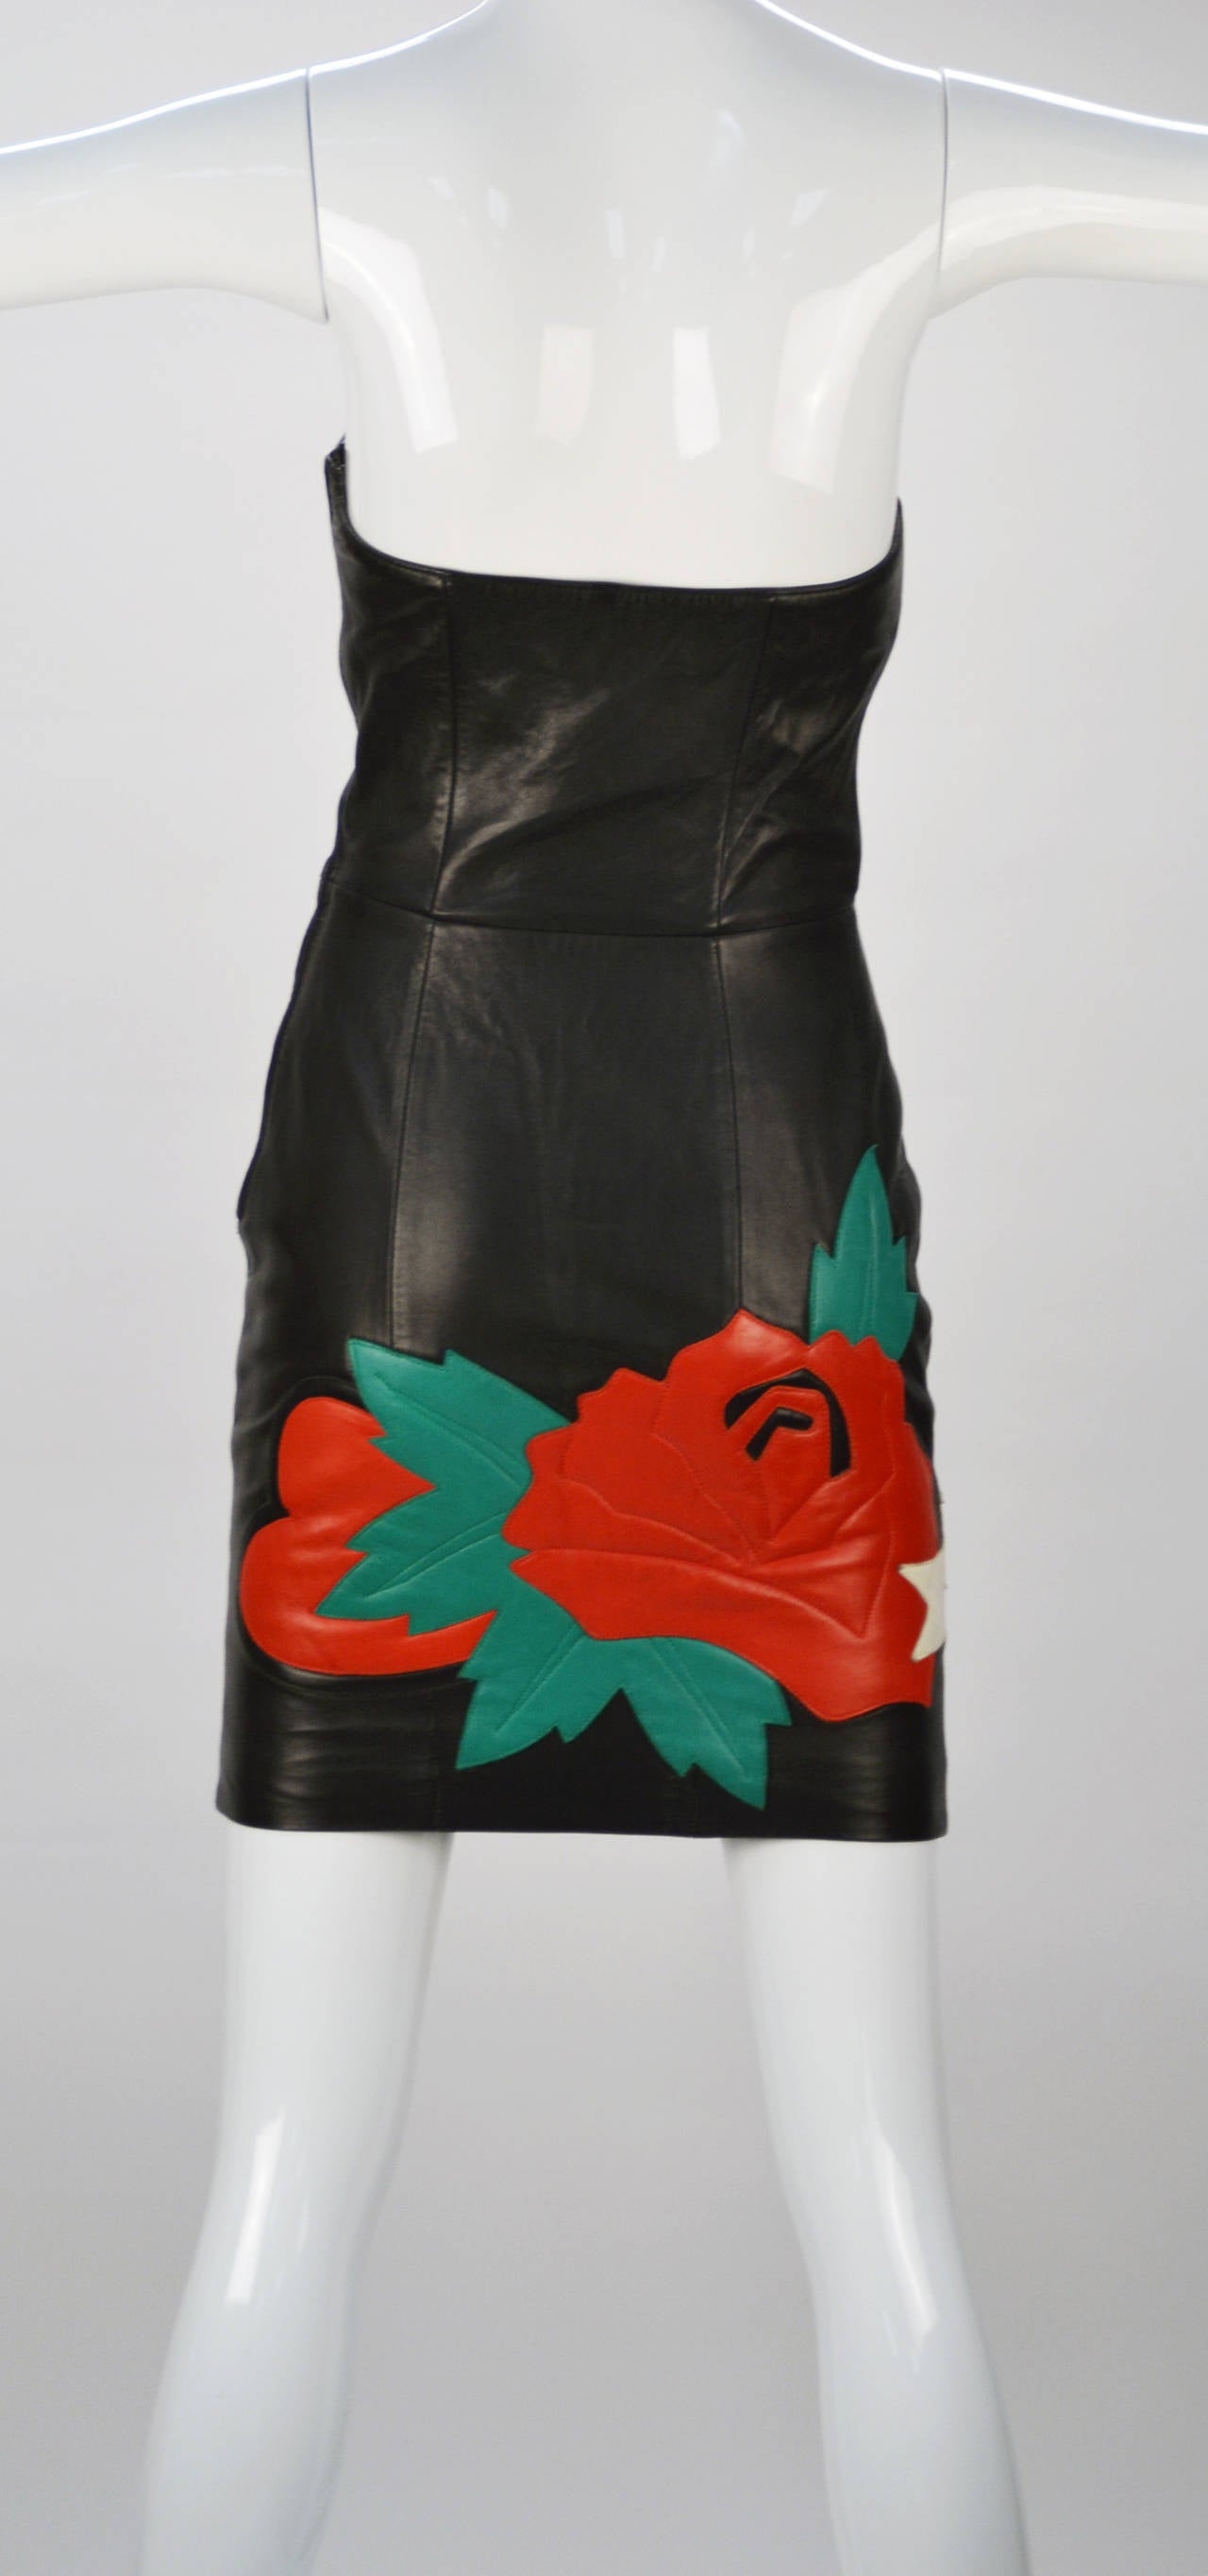 Knock out! Iconic North Beach Leather, True Love bustier dress.  Black Mirabella Lamb with quilted red, green and white leather.  Red rose and heart motif with embroidered 